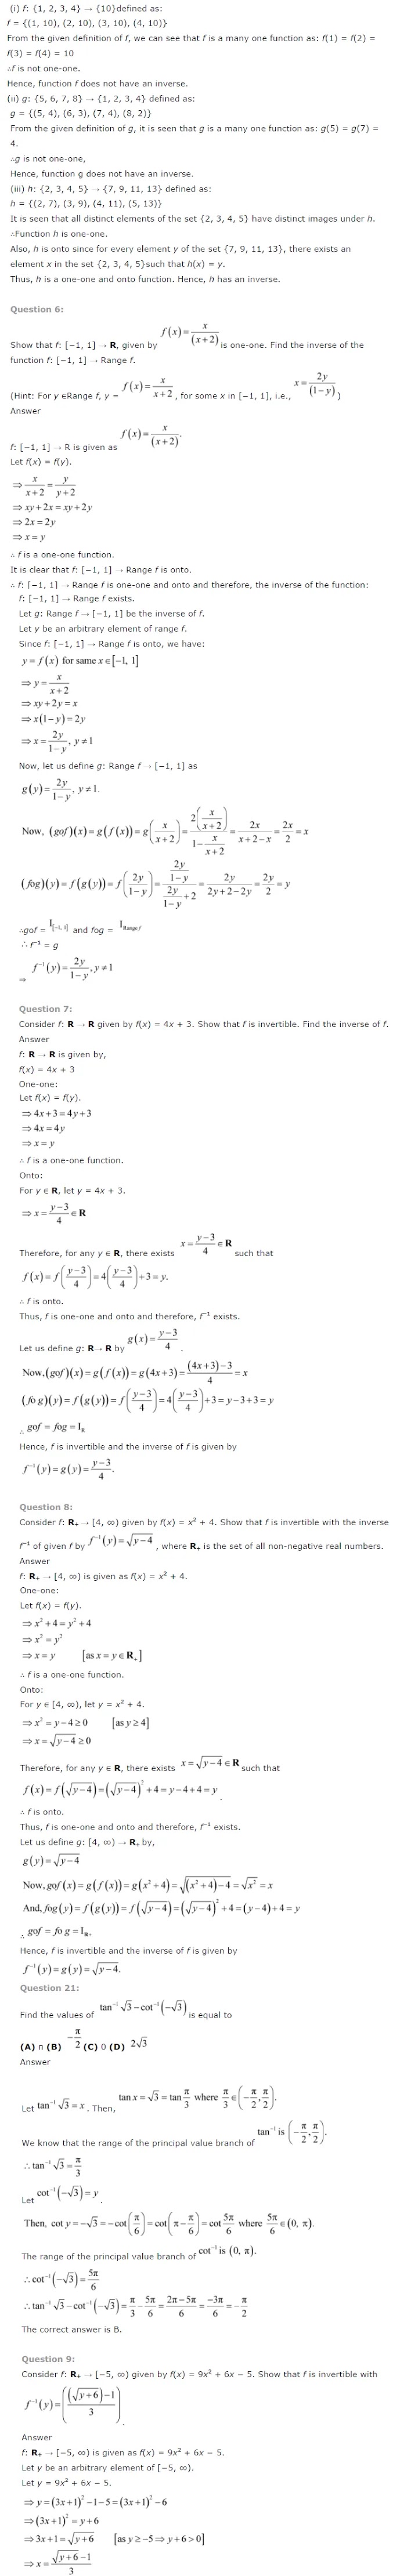 NCERT-Solutions-Class-12-Maths-Chapter-1-Relations-and-Functions-6